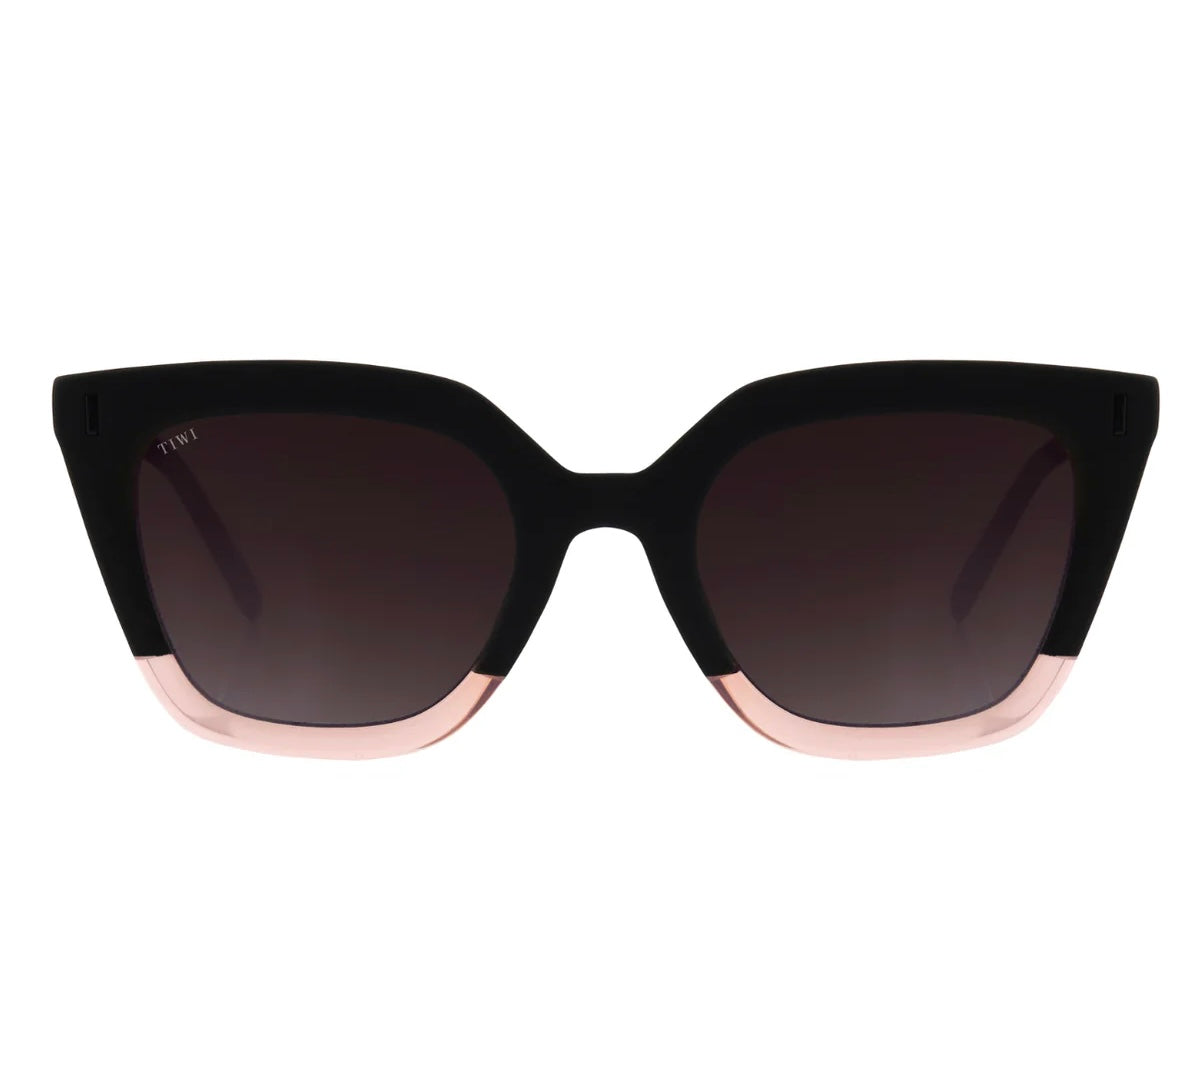 HALE Sunglasses Available in more colors Bicolor Black/Pink  